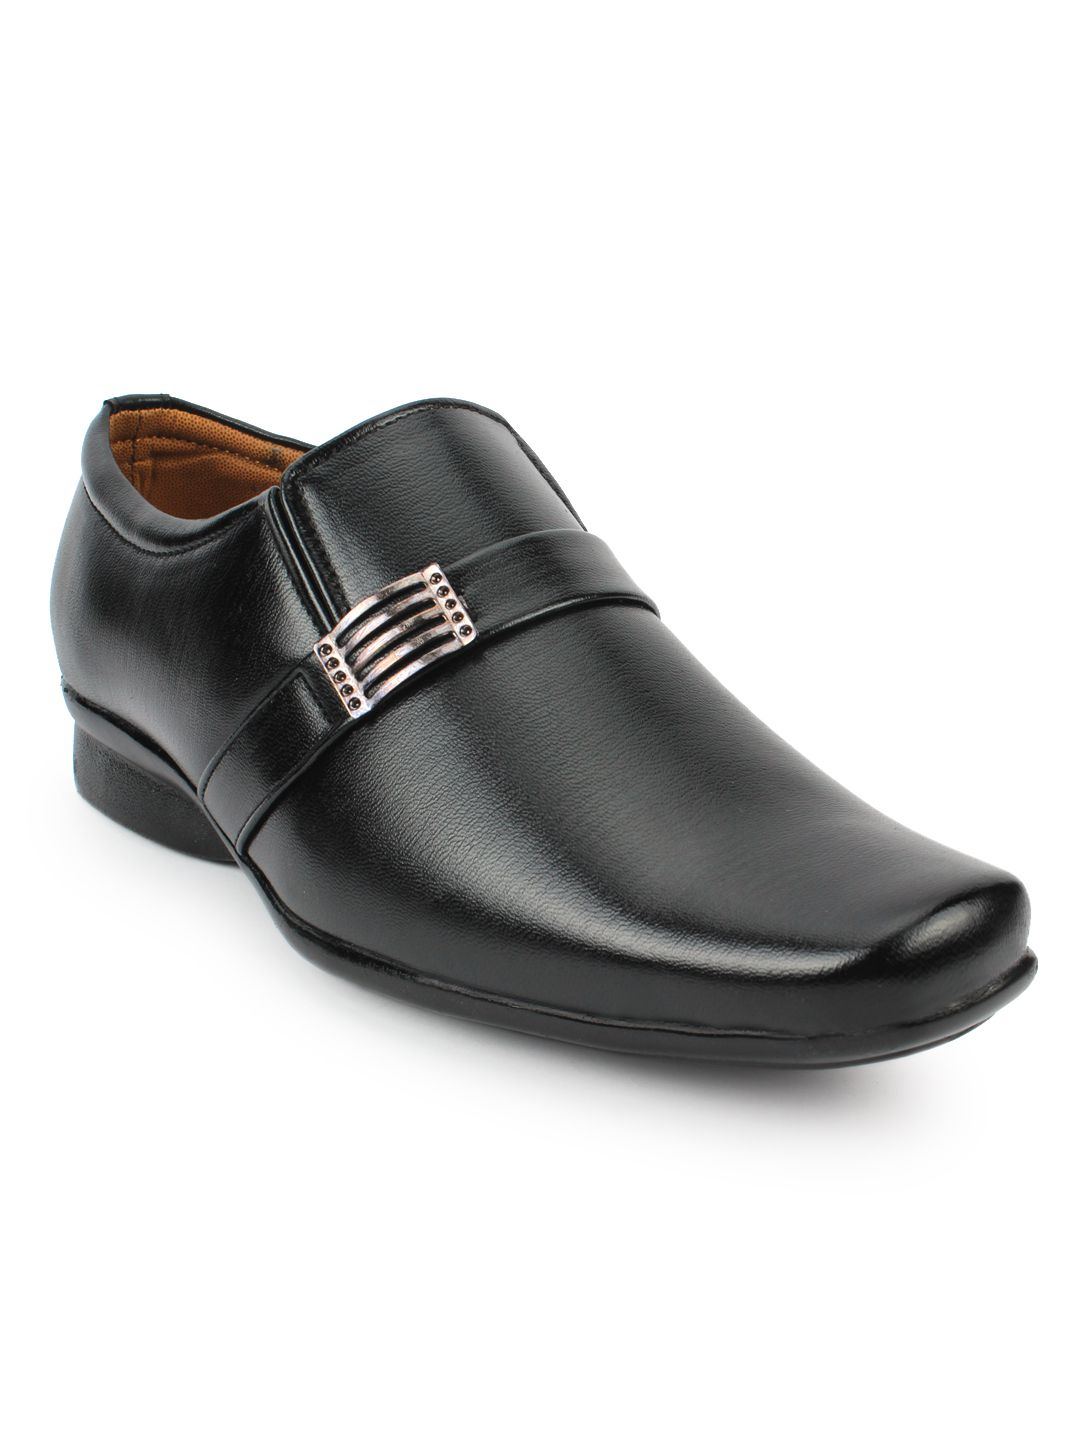     			Fashion Victim Office Non-Leather Black Formal Shoes